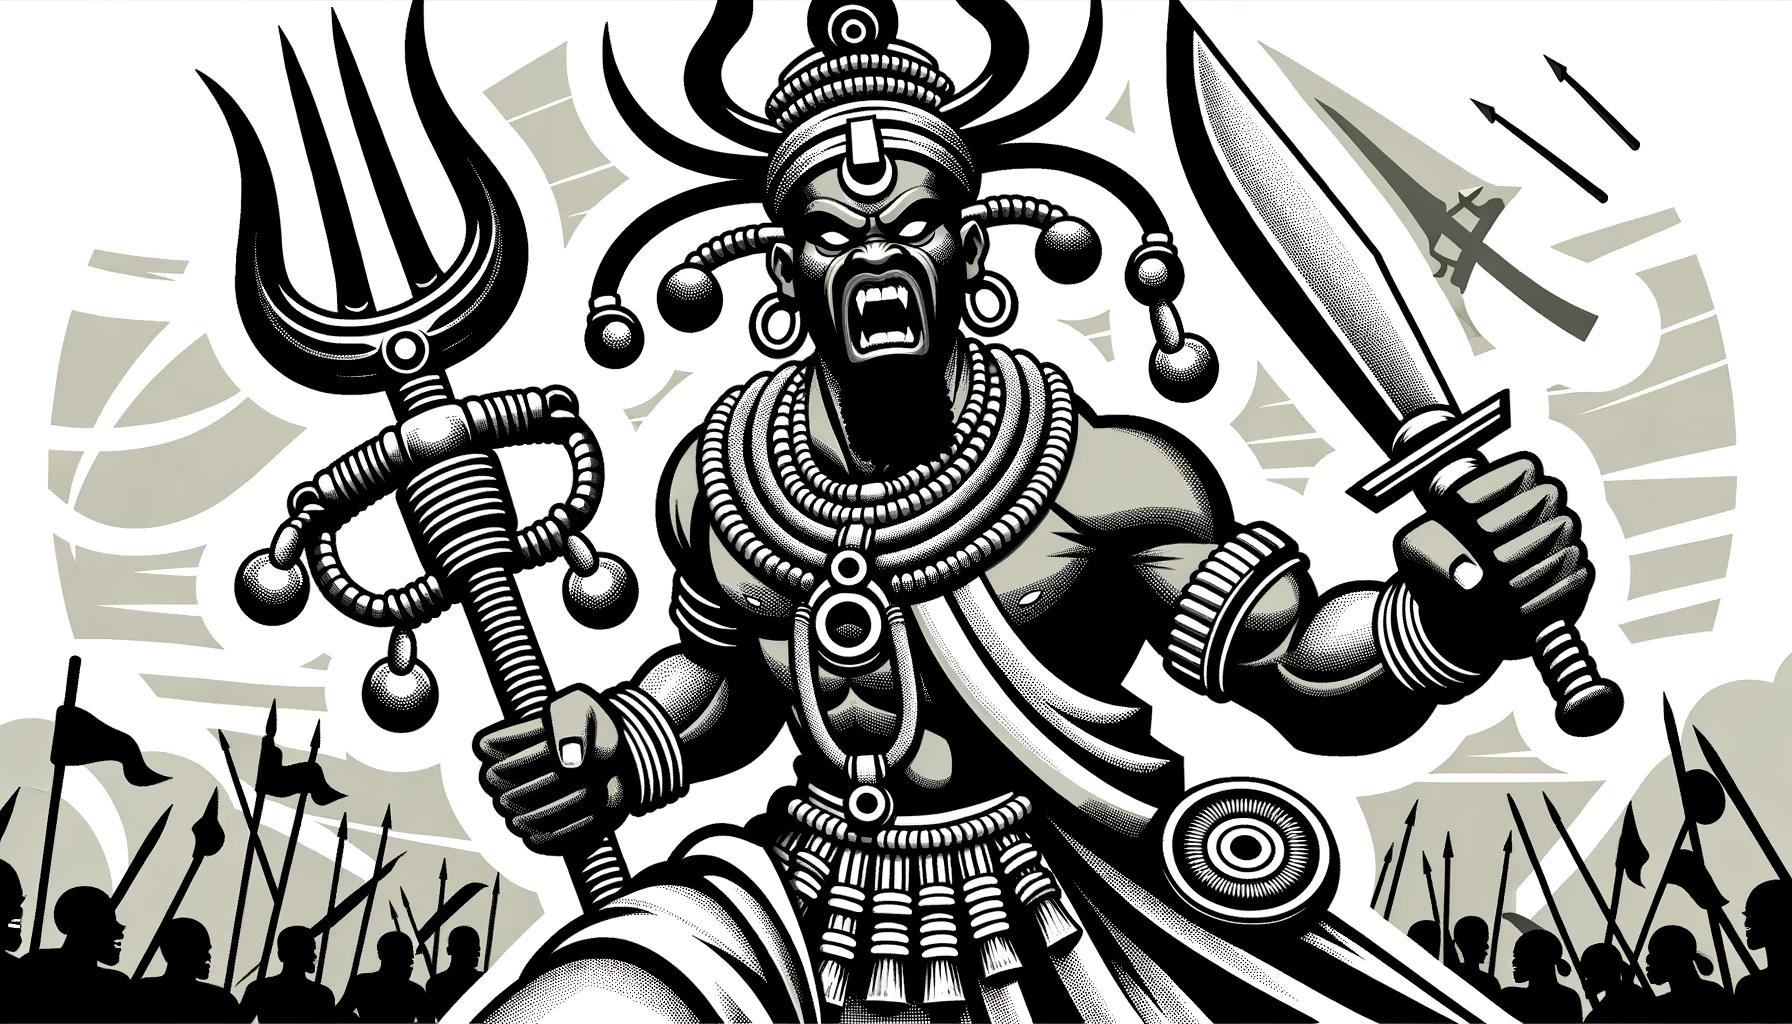 Ogun: The Powerful Deity of War and Iron in African Religions